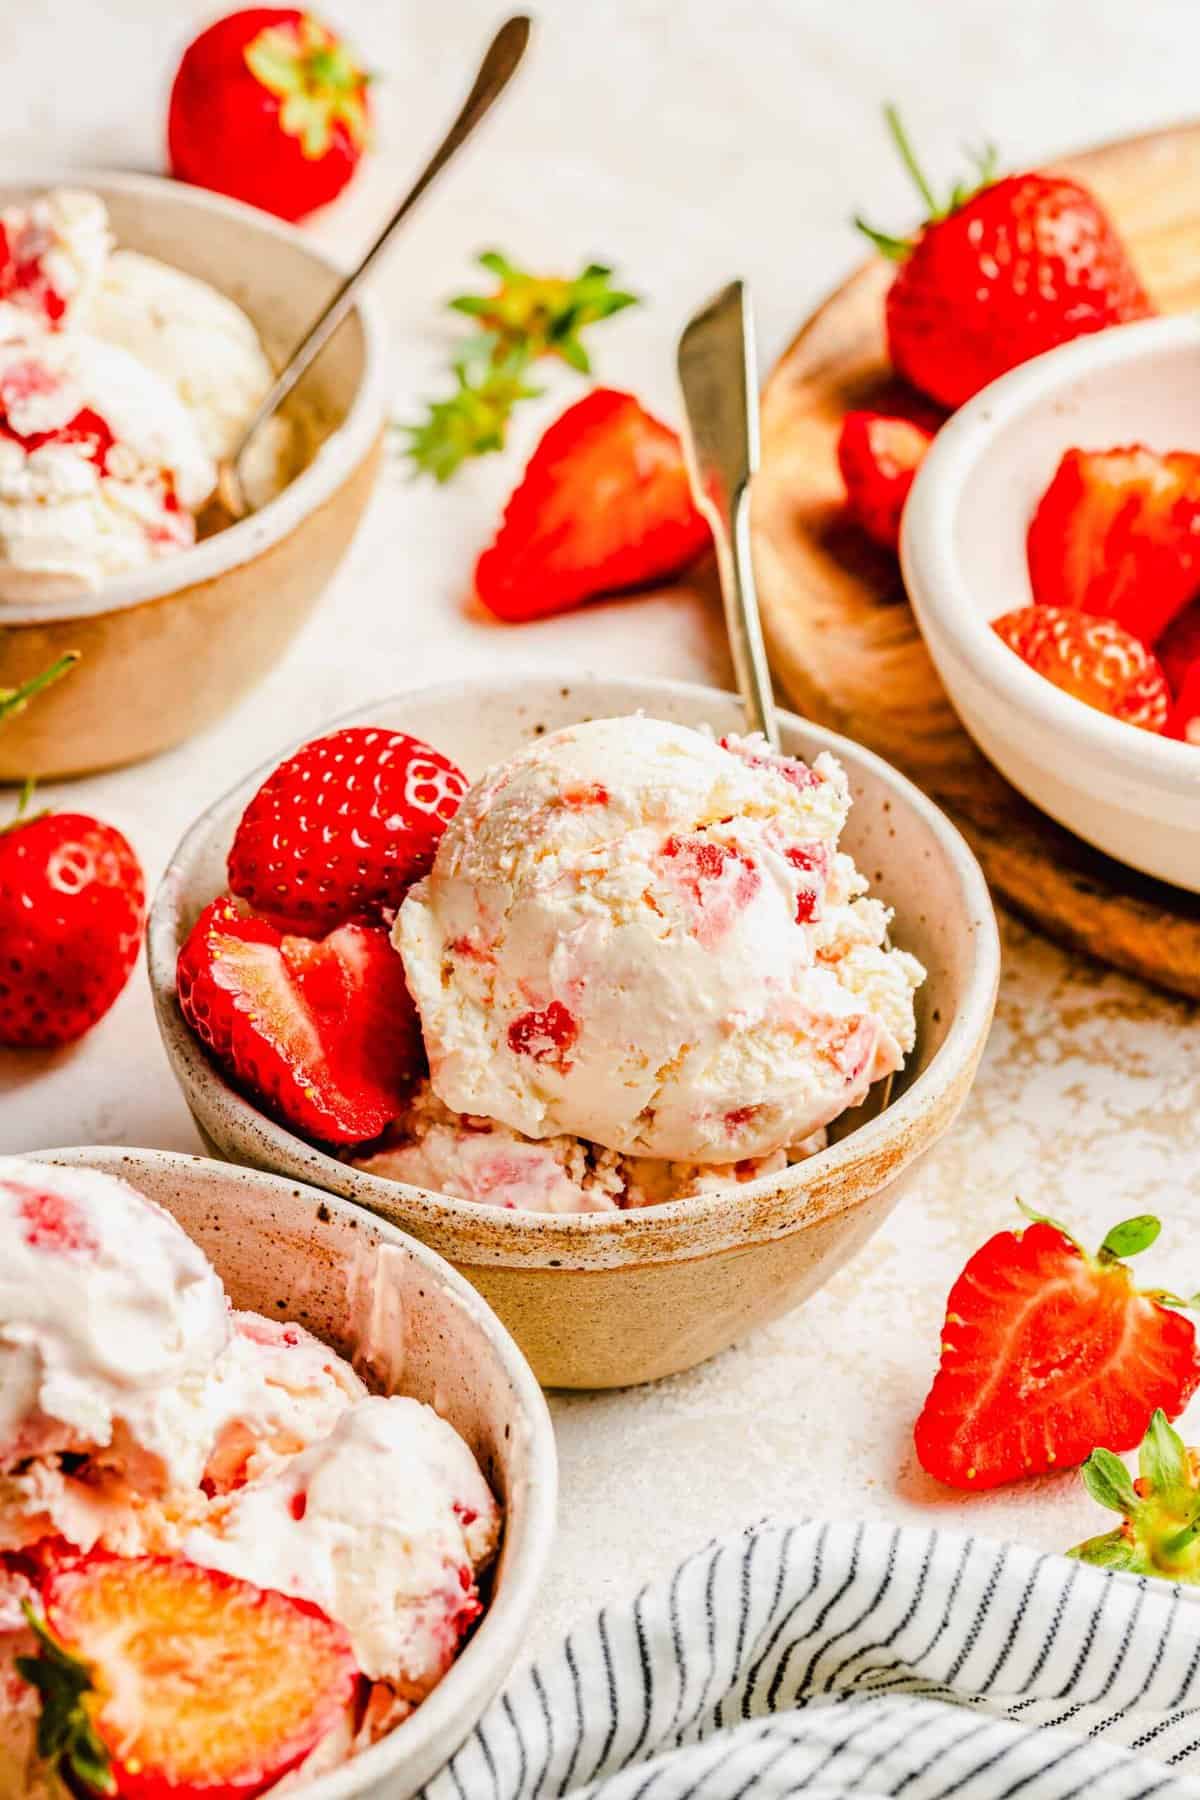 Strawberry ice cream served in bowls with spoons and garnished with fresh strawberries.